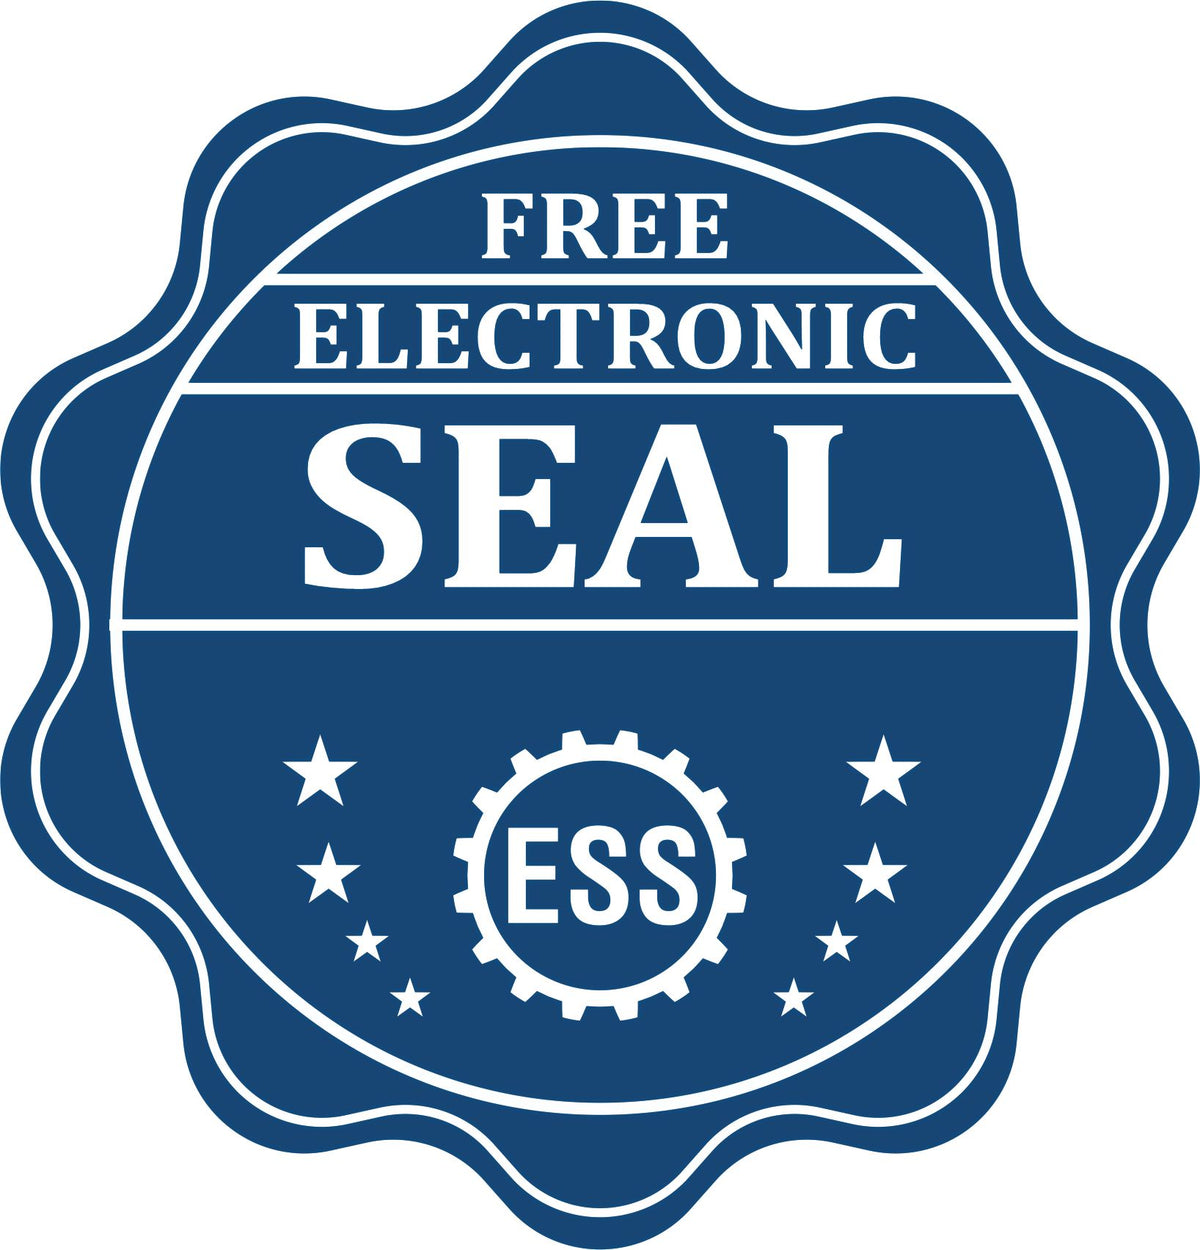 A badge showing a free electronic seal for the Hybrid Minnesota Architect Seal with stars and the ESS gear on the emblem.